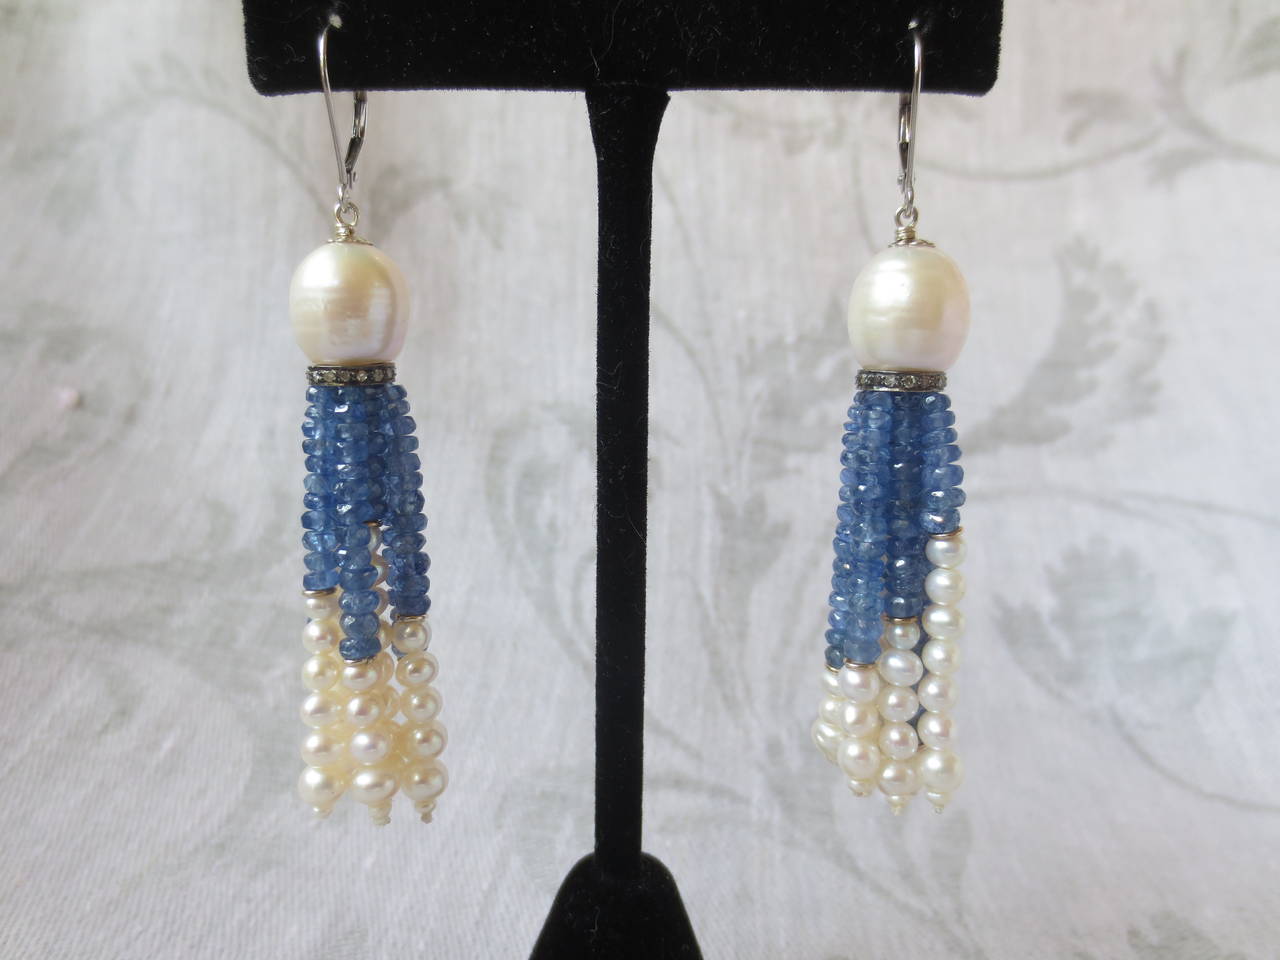 These timeless white pearl and sapphire tassel earrings with 14k white gold lever backs feature a large pearl drop cup set on a sterling silver and diamond encrusted roundel. The tassels are made with faceted blue sapphire beads and graduated